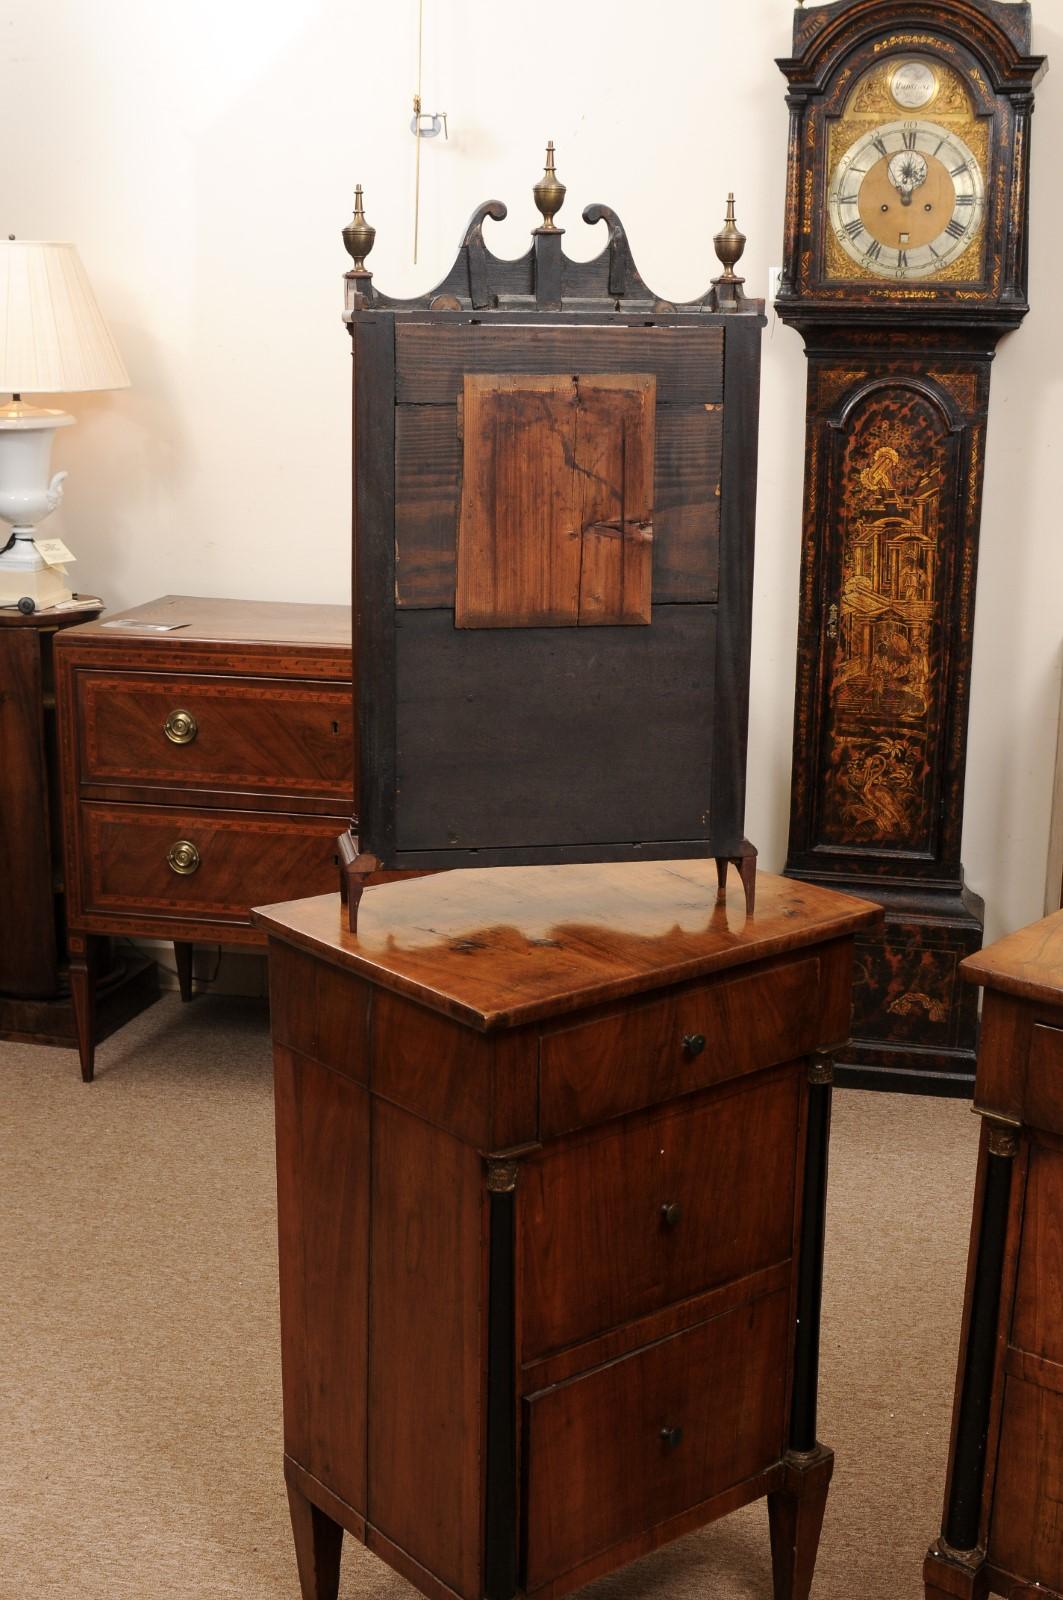 Early 19th Century American Pillar & Scroll Clock in Mahogany For Sale 4